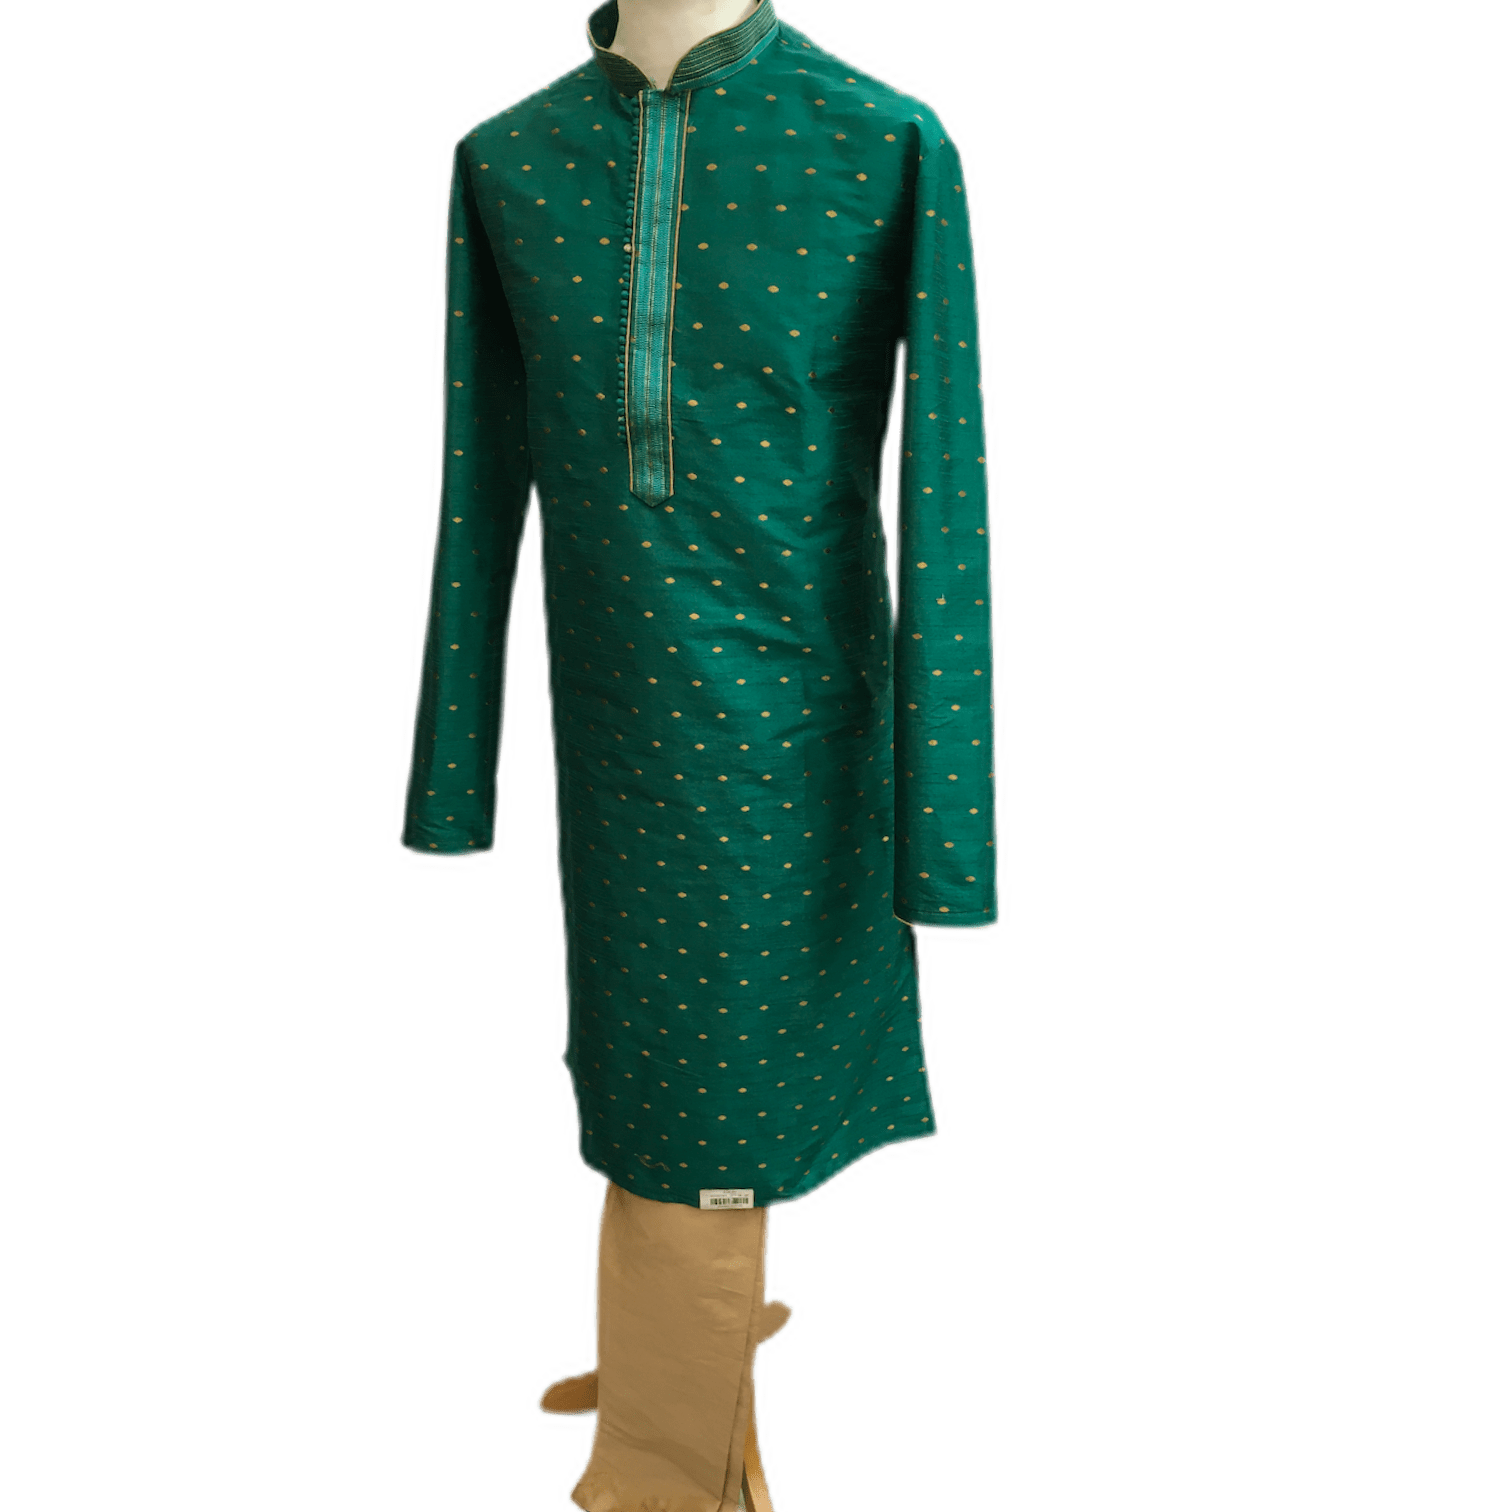 Mens Indian Kurta set in Green , for weddings, Bollywood Party (with gold trousers) - YD1933 KV0819 - Prachy Creations